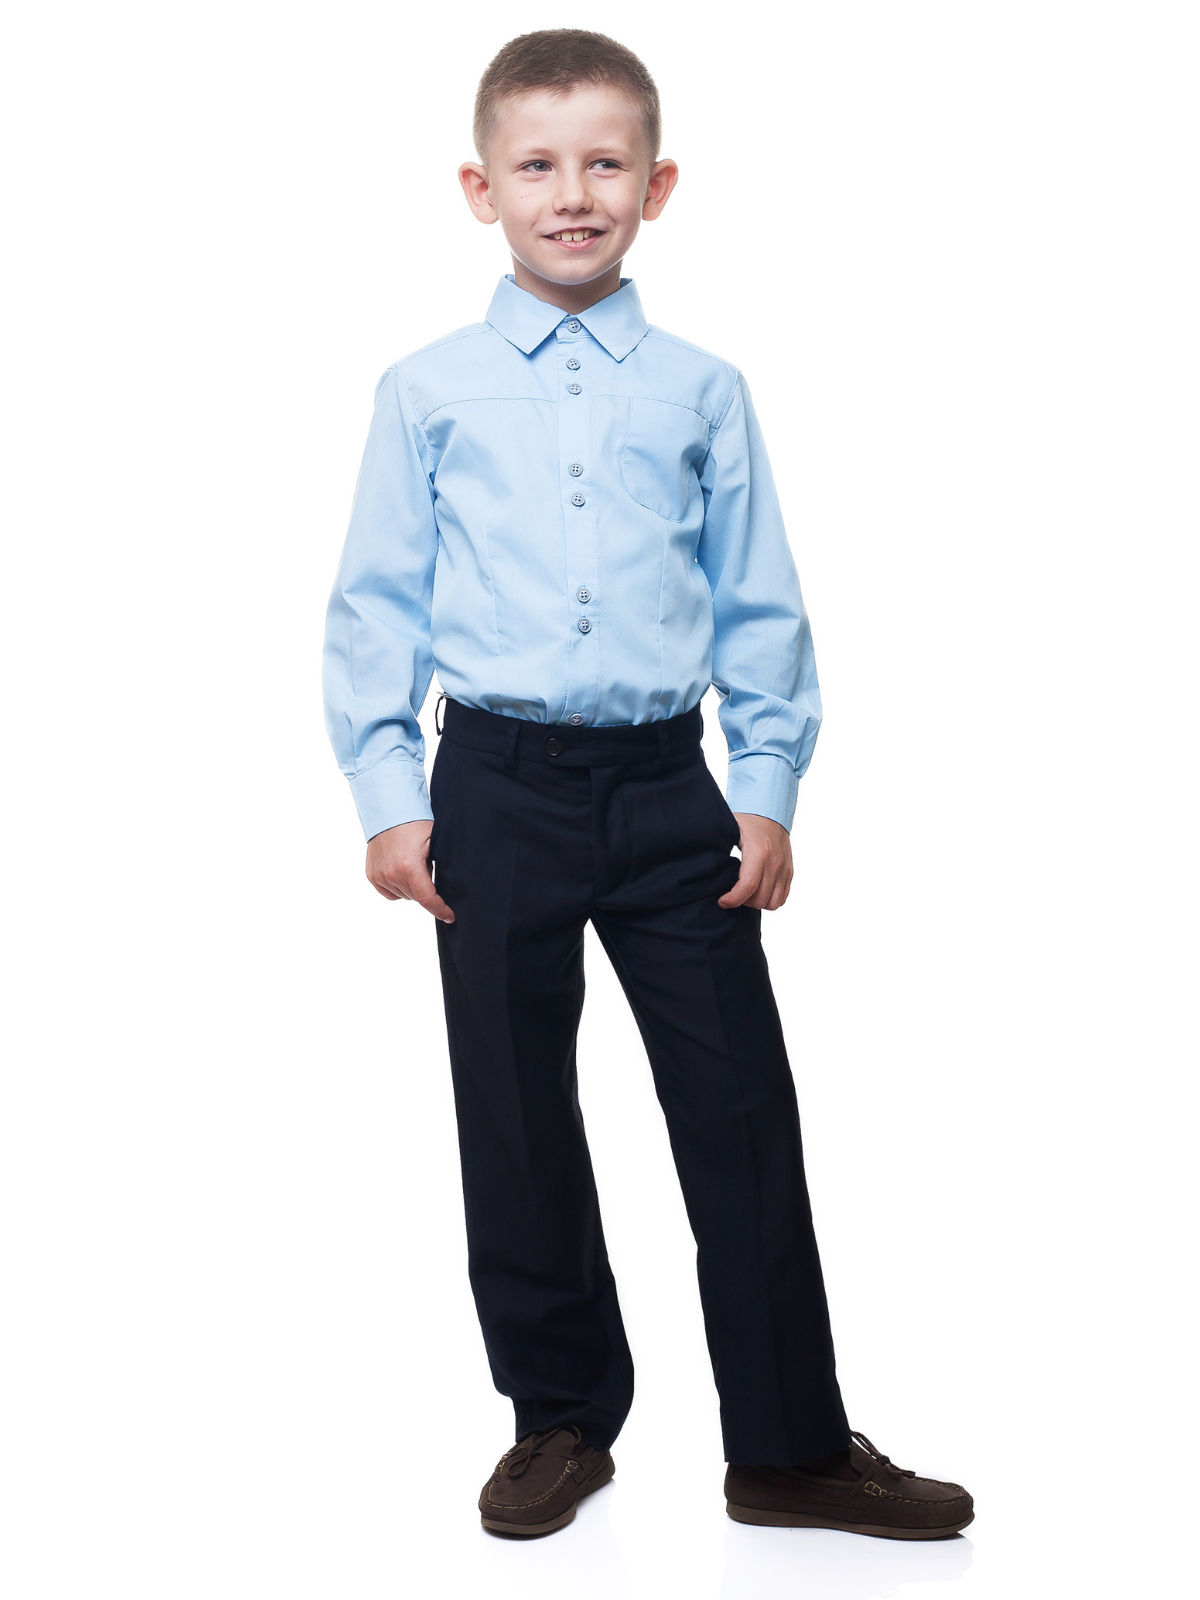 Classic School Boys Uniform Navy Trousers by Kids Couture